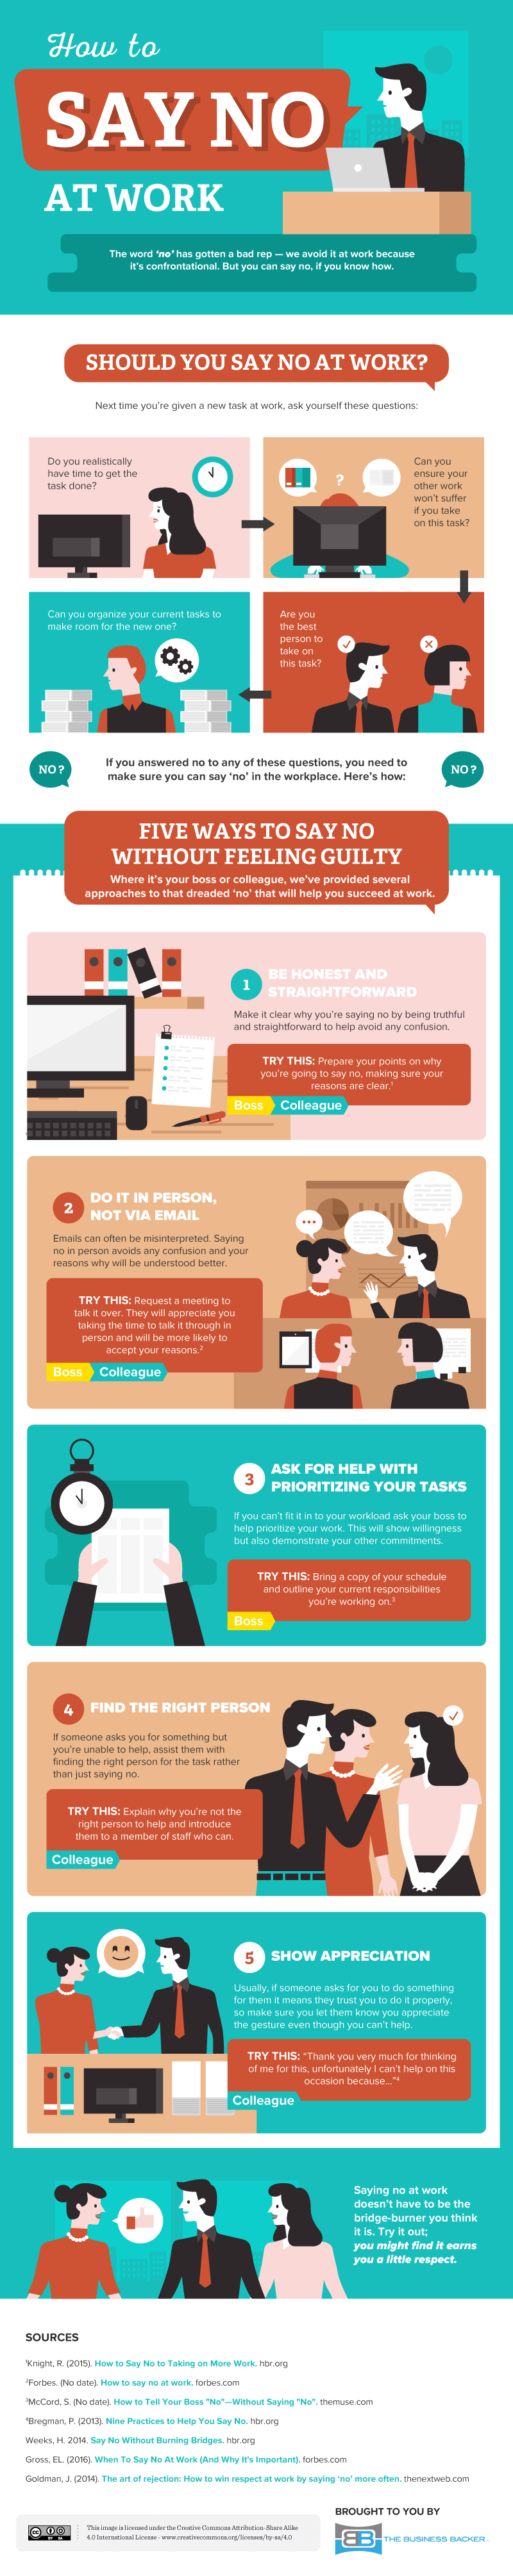 Tricks to Say "No" at Work- Infographic